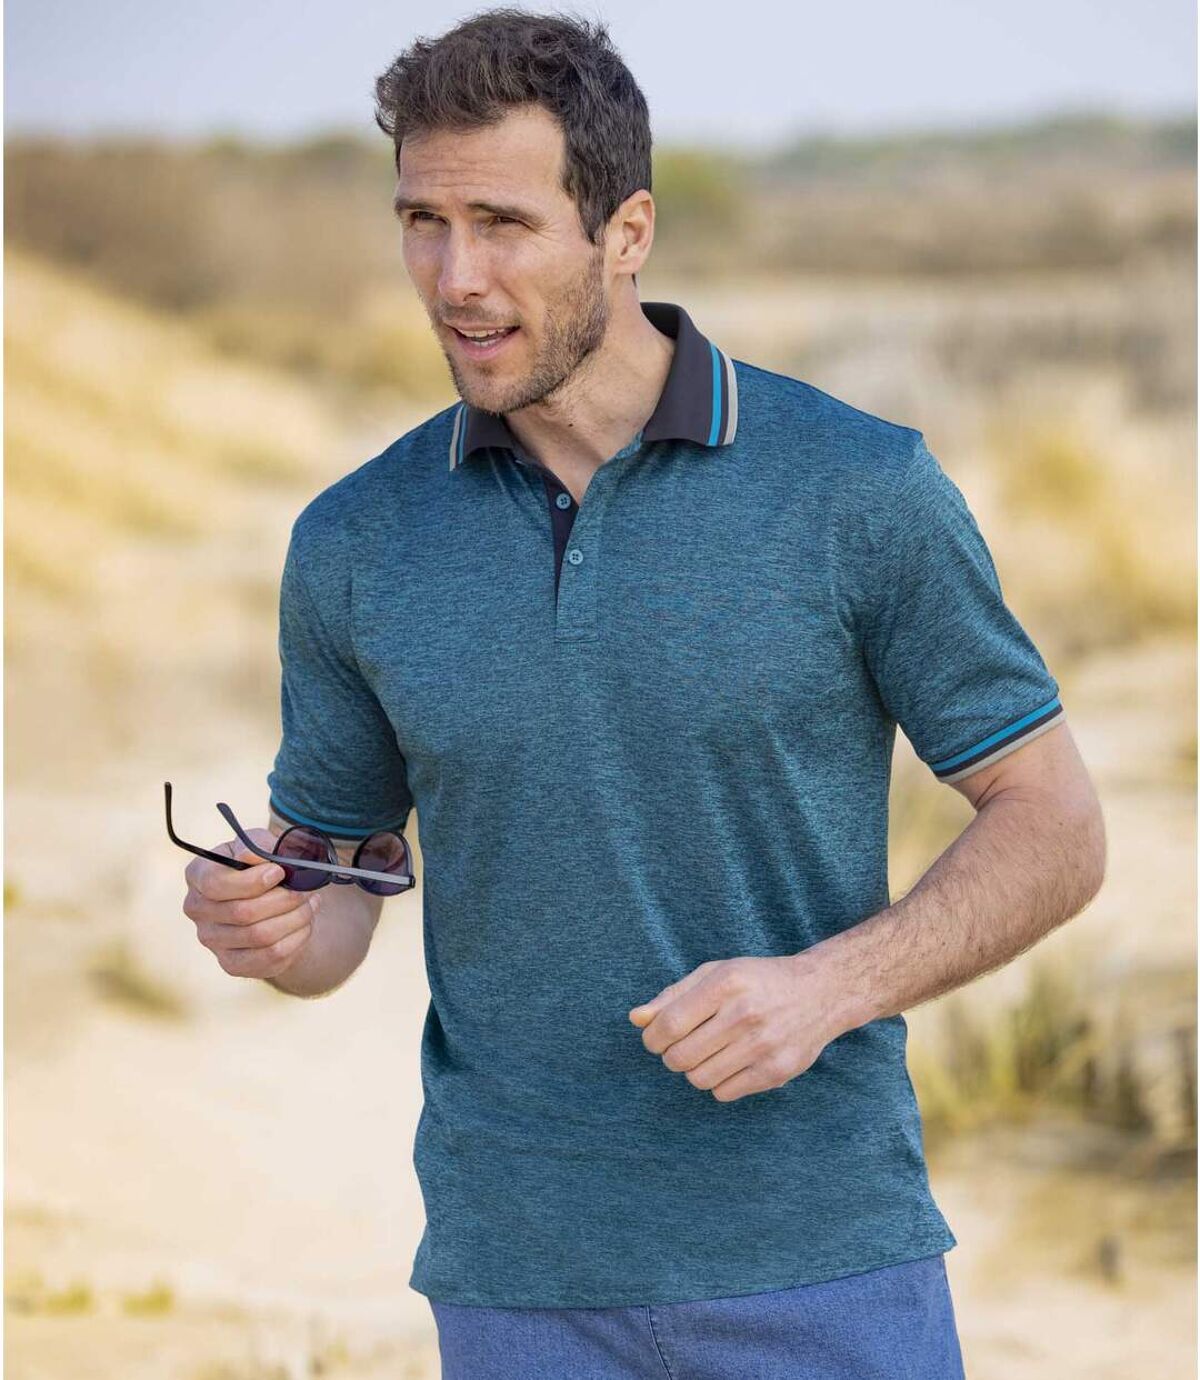 Pack of 2 Men's Sporty Polo Shirts - Turquoise Gray Atlas For Men